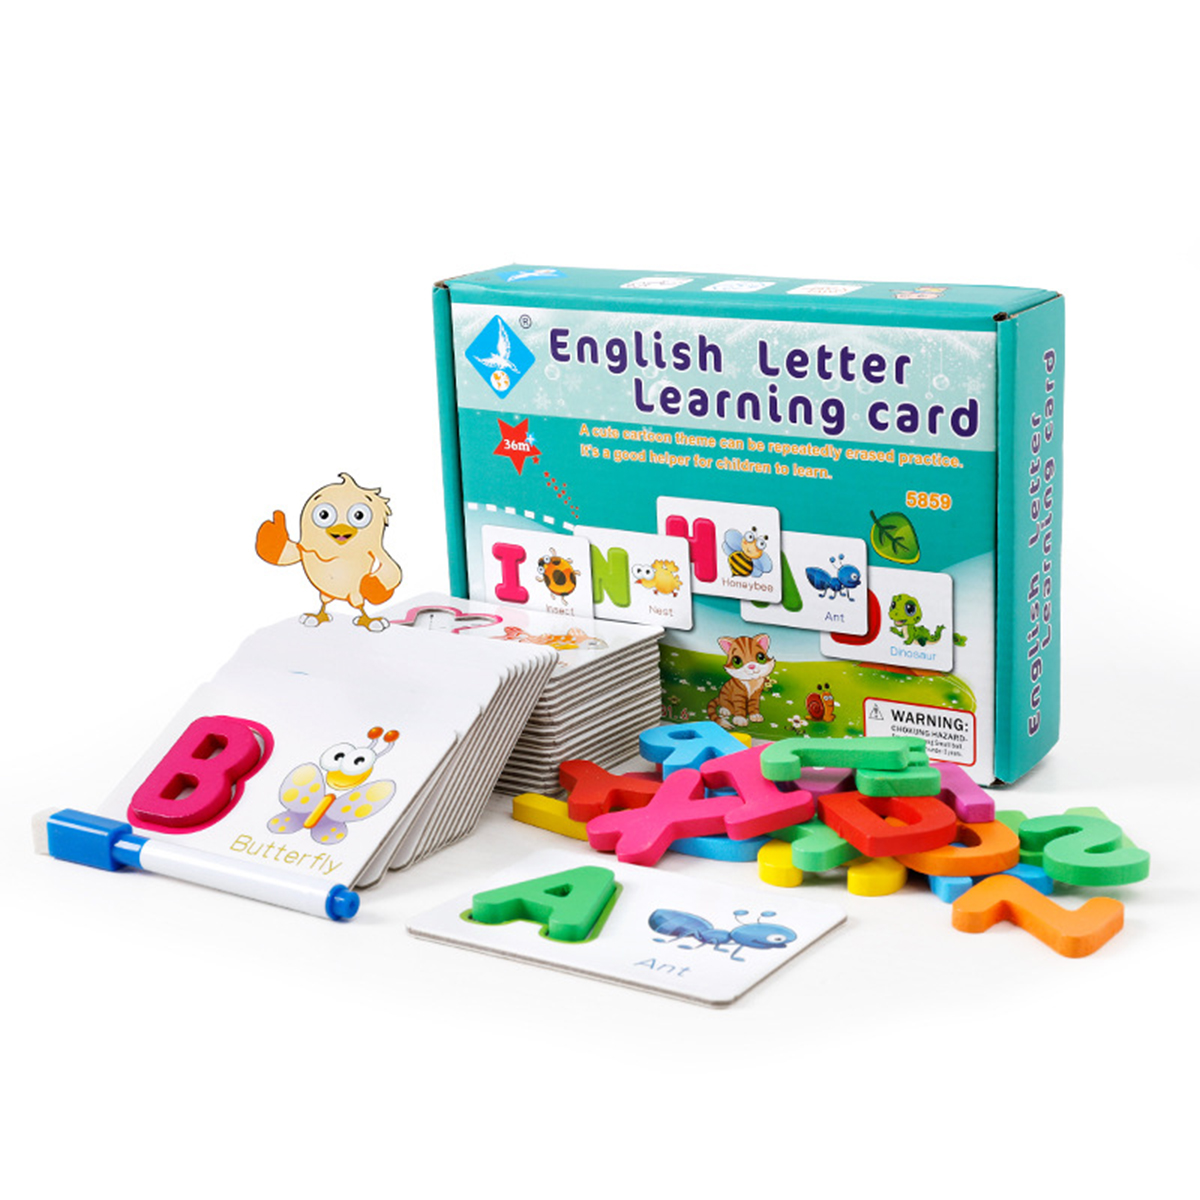 Puzzle-Alphabet-Spelling-English-Letters-Animal-Cards-Educational-Learning-Toy-for-Kids-Gift-1726968-3